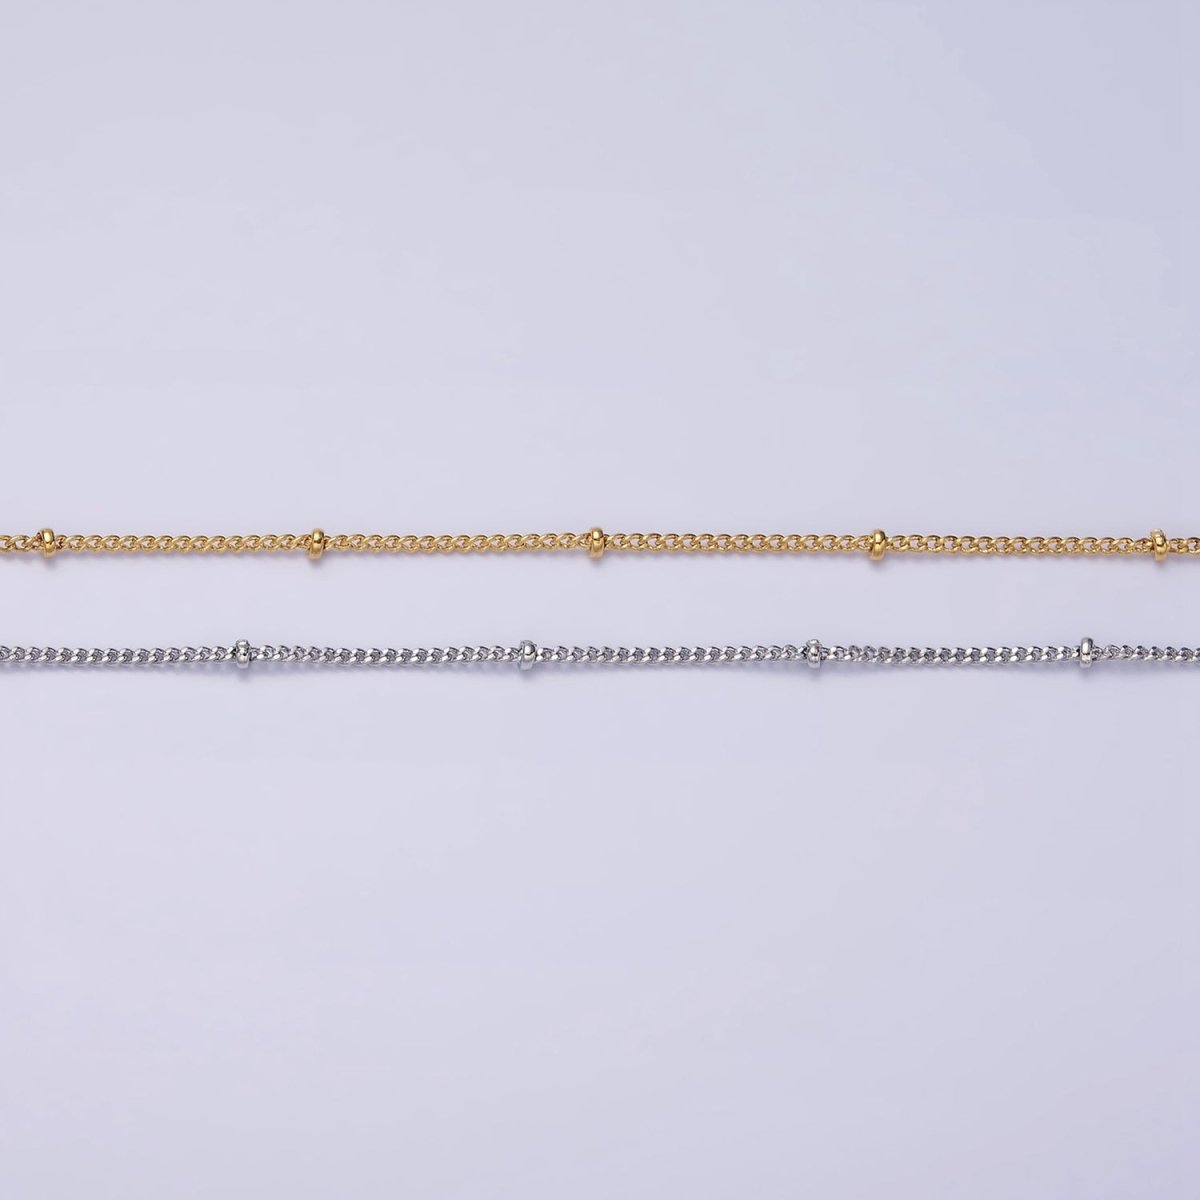 24K Gold Filled Curb Chain With Gold Beads For Wholesale Necklace Dainty Satellite Chain Jewelry Making Supplies | WA-1845 WA-1846 Clearance Pricing - DLUXCA